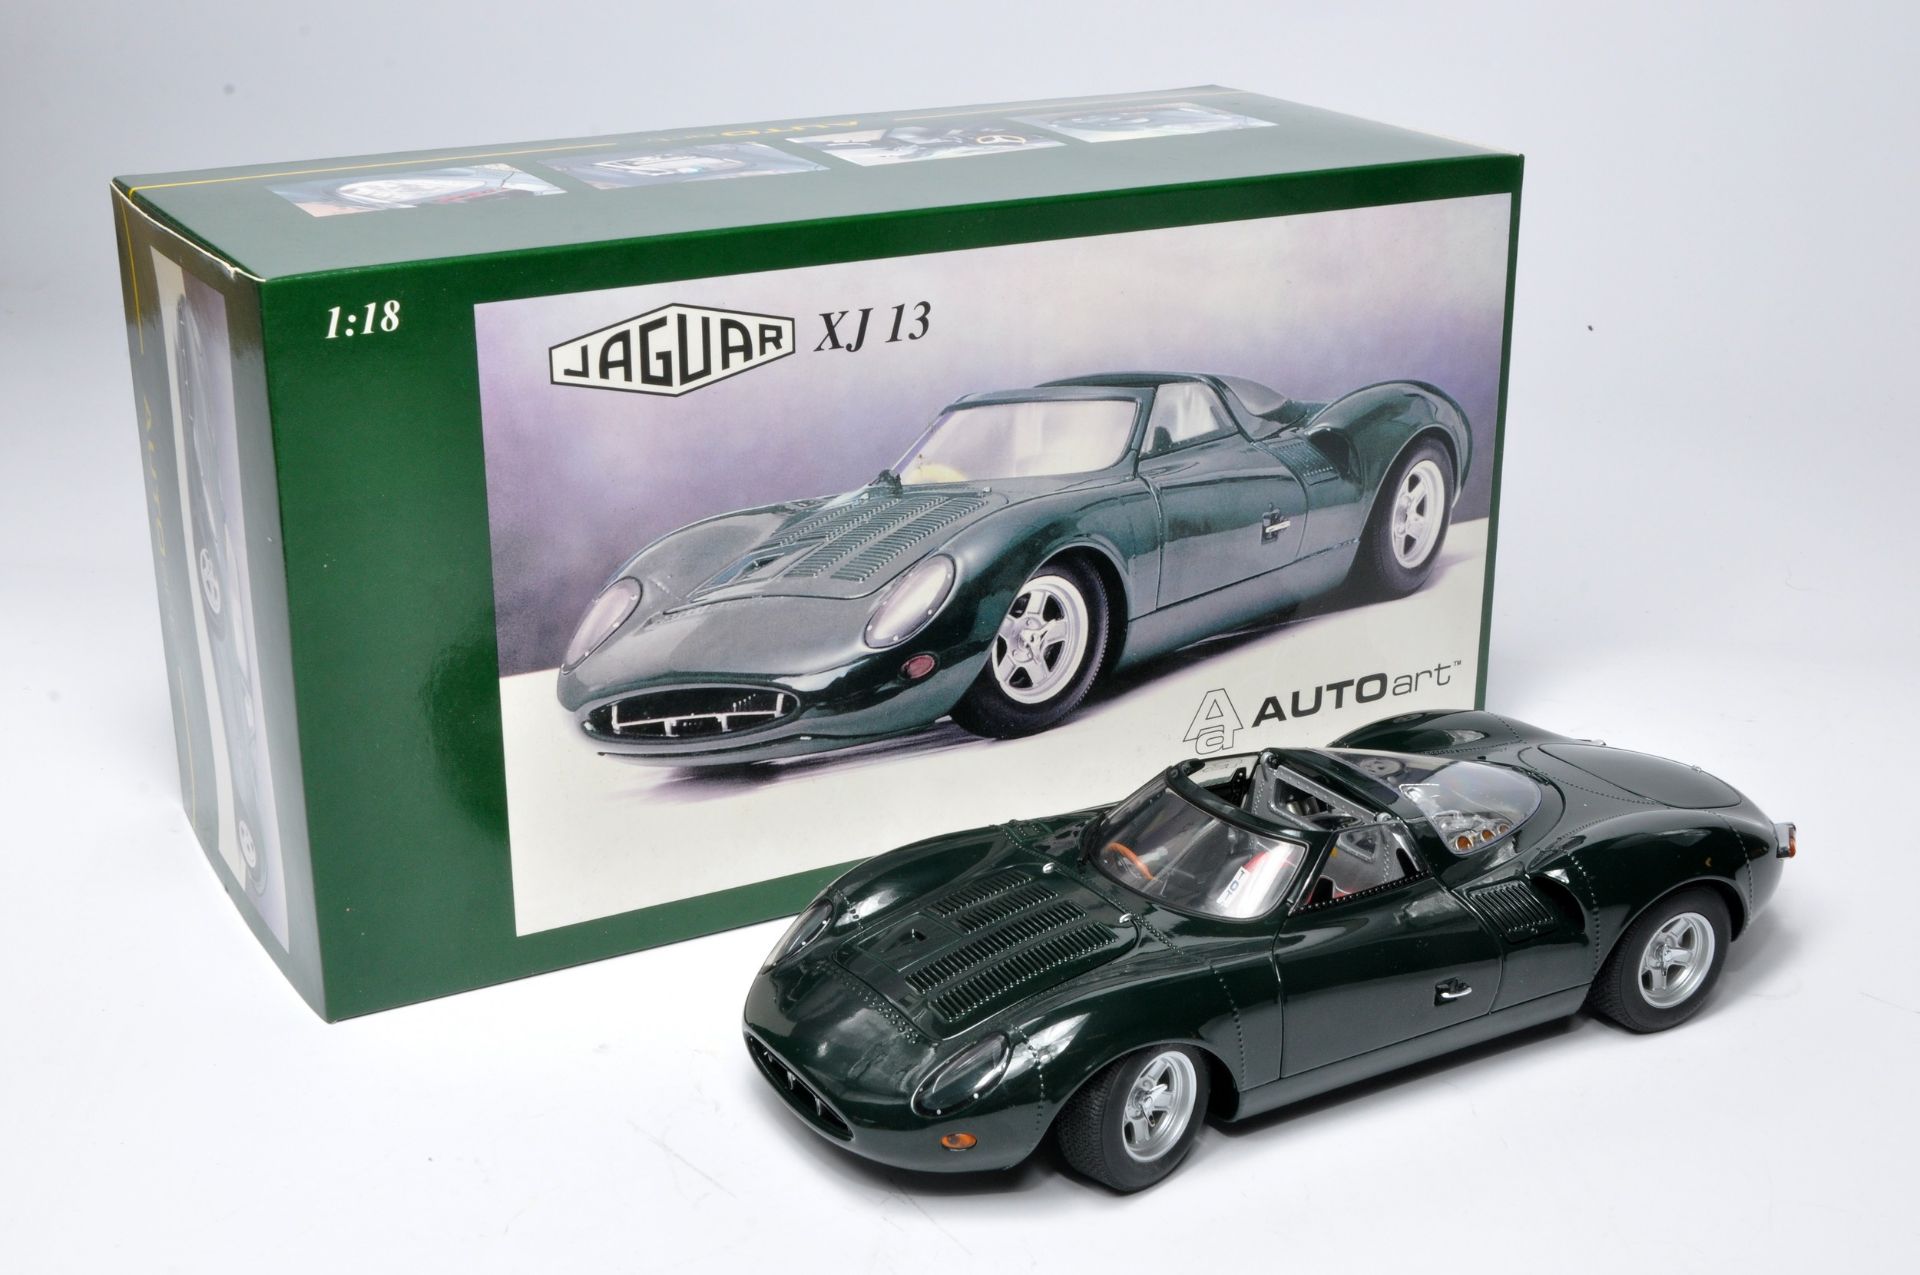 Autoart 1/18 diecast model car issue comprising Jaguar XJ13. Looks to be without obvious sign of